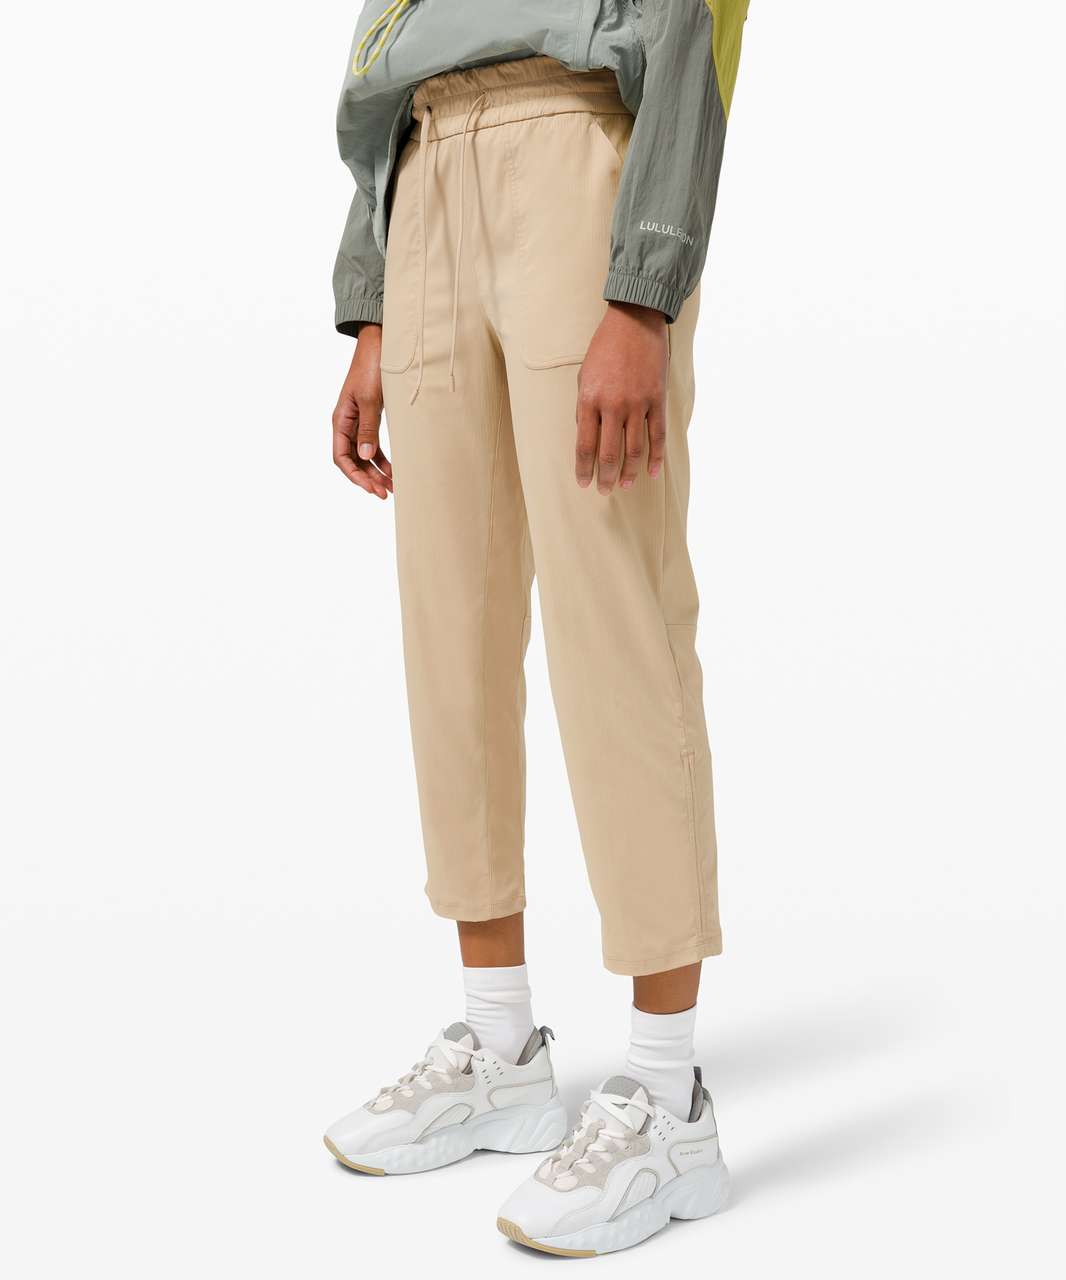 Lululemon Beyond the Studio Crop - Trench (First Release)